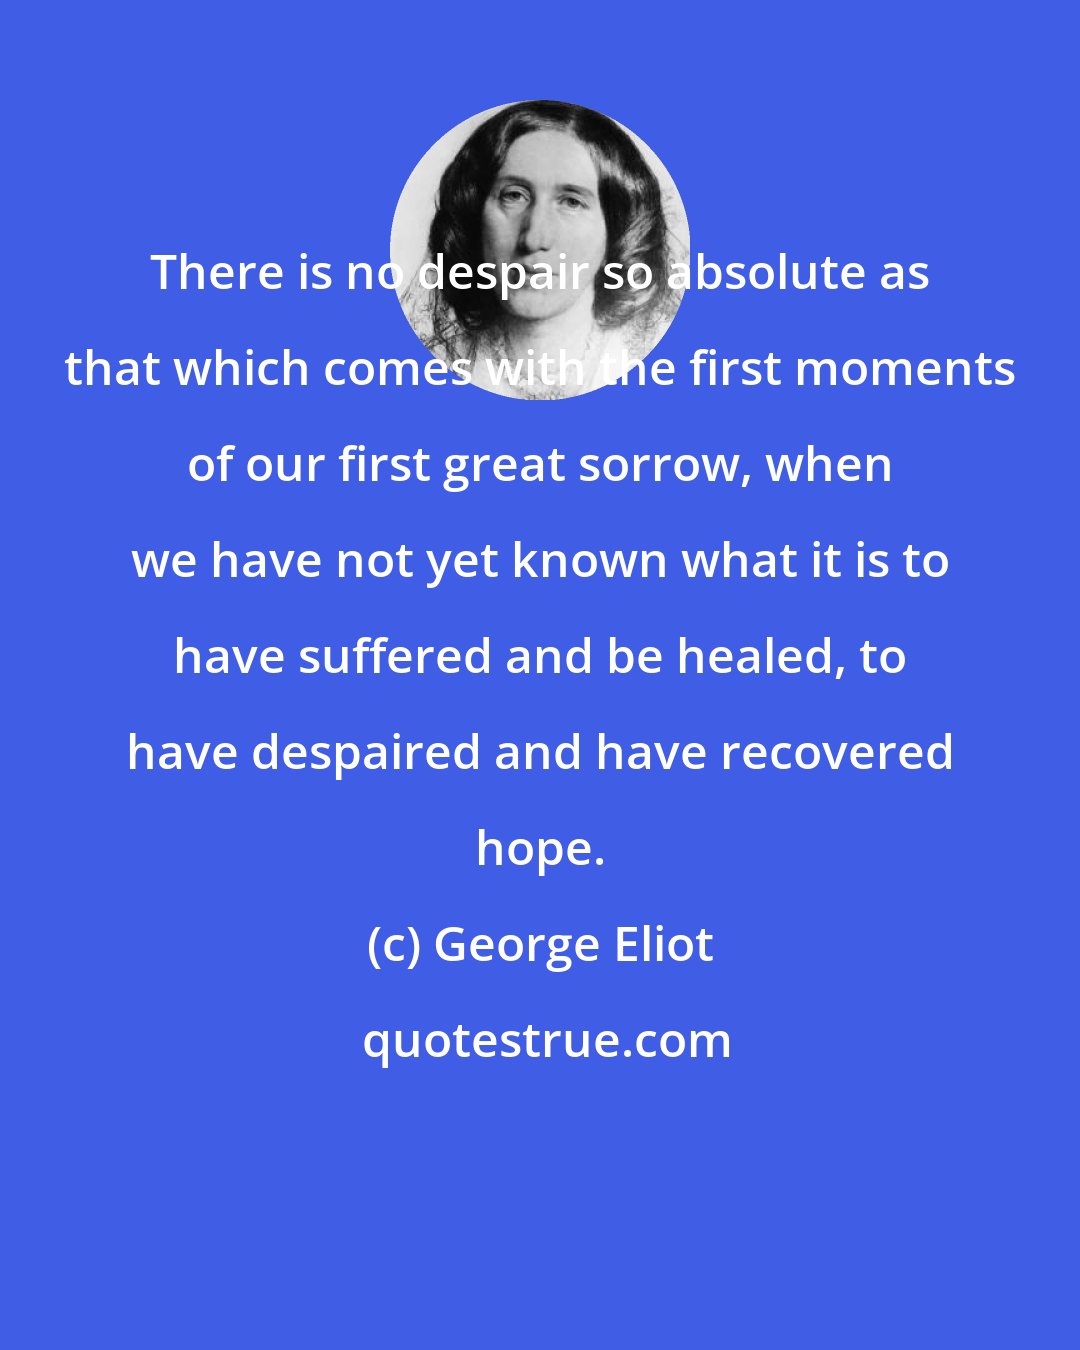 George Eliot: There is no despair so absolute as that which comes with the first moments of our first great sorrow, when we have not yet known what it is to have suffered and be healed, to have despaired and have recovered hope.